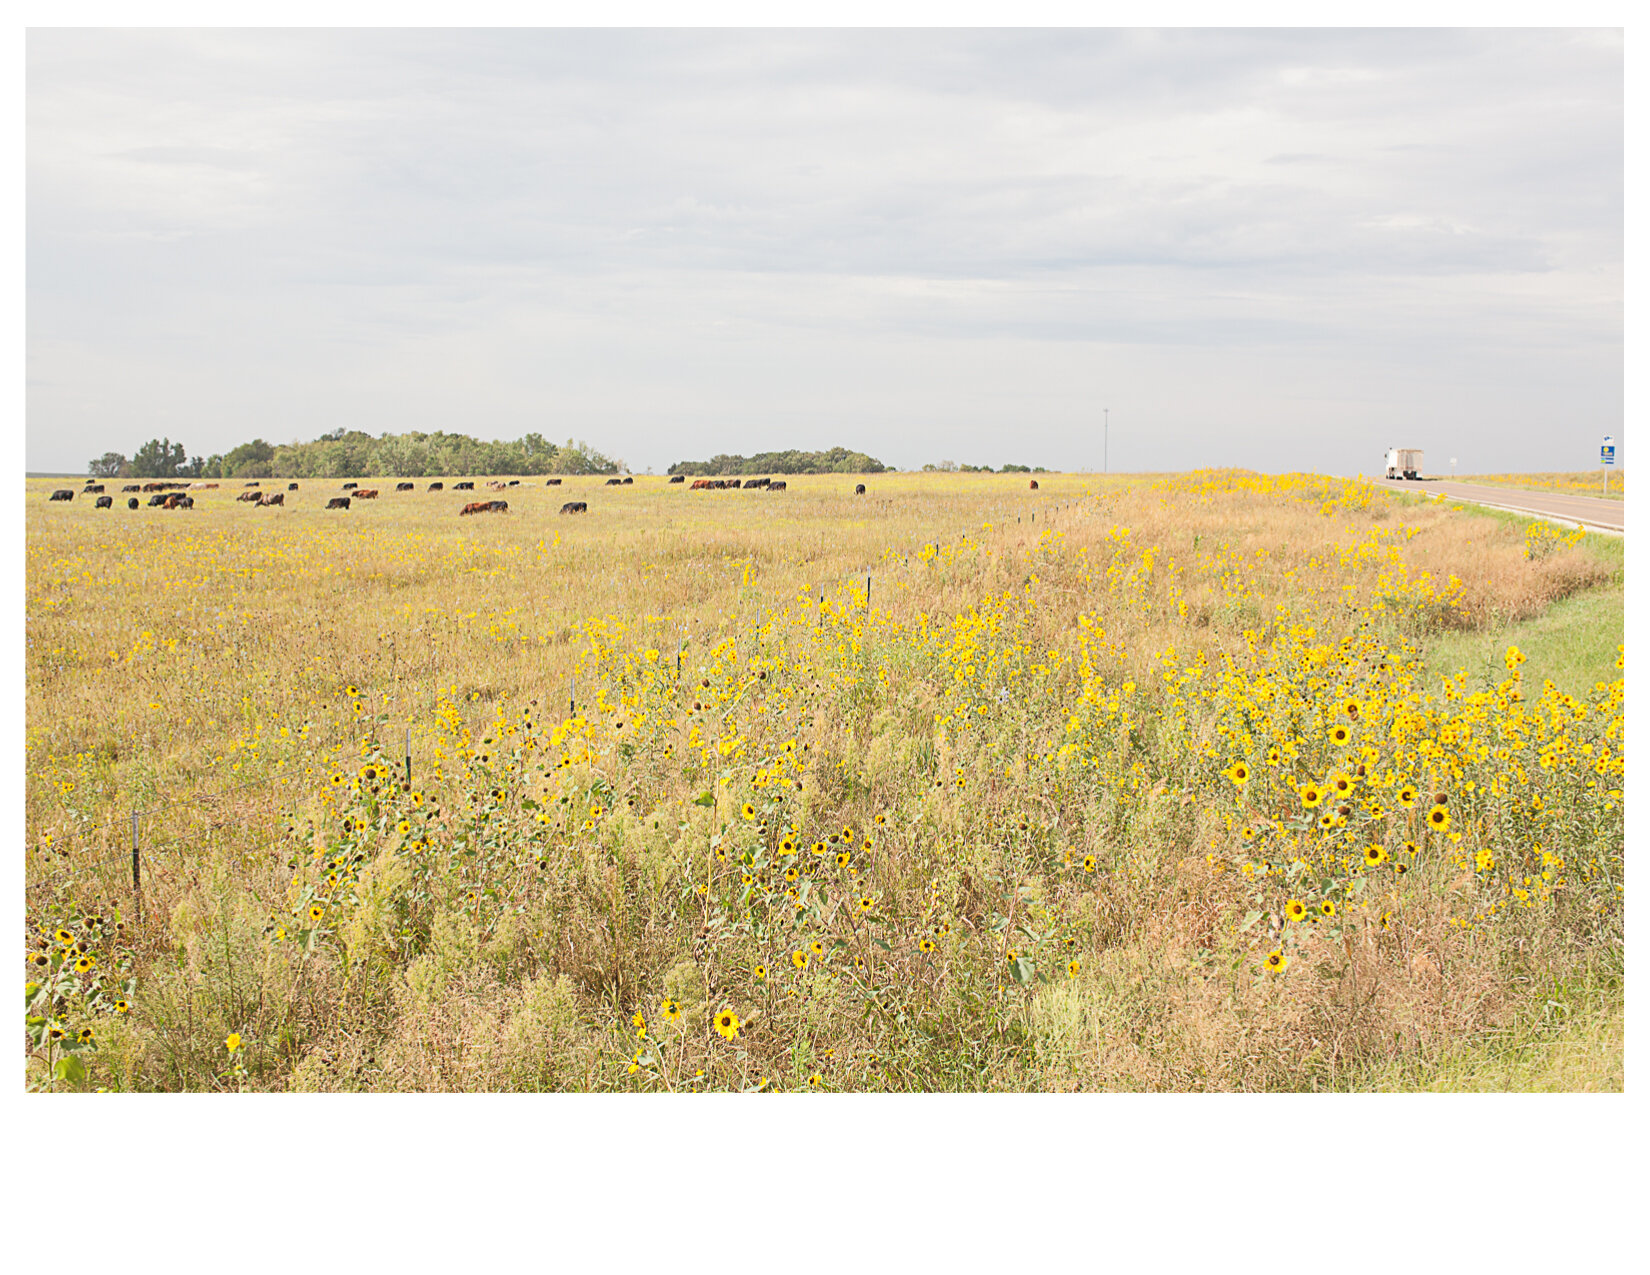 Cattle and Flowers, North of Strong City, KS